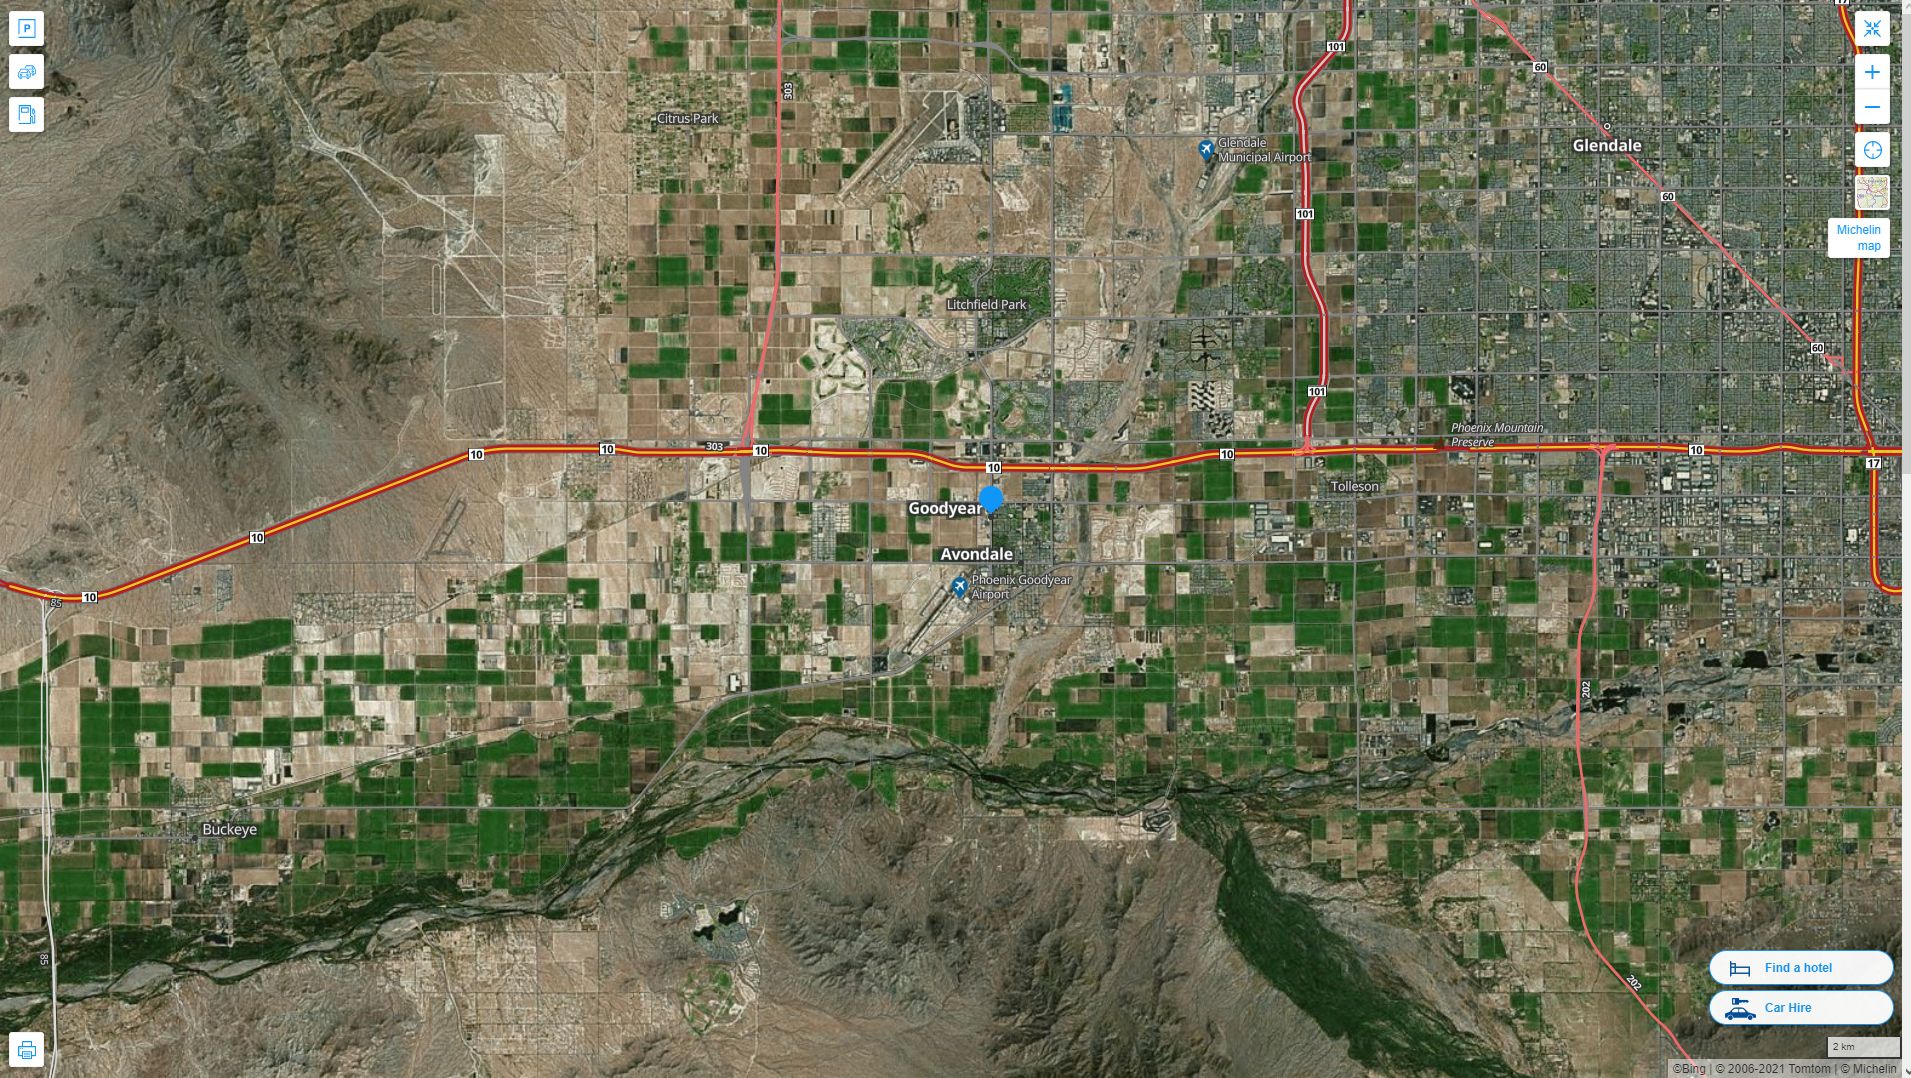 Goodyear Arizona Highway and Road Map with Satellite View